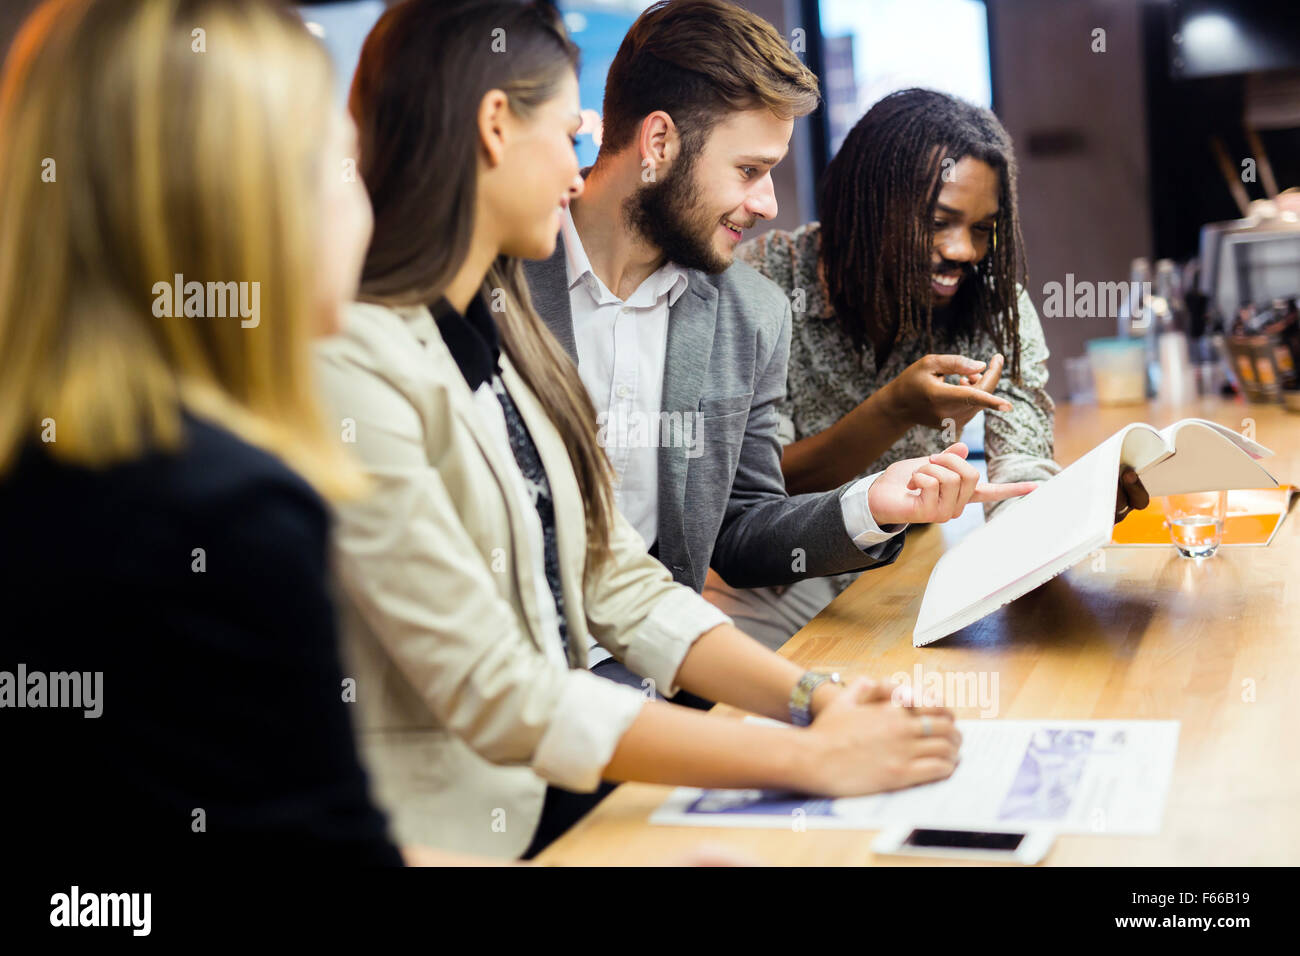 Group of people discussing the contents of the article while sitting in a bar Stock Photo